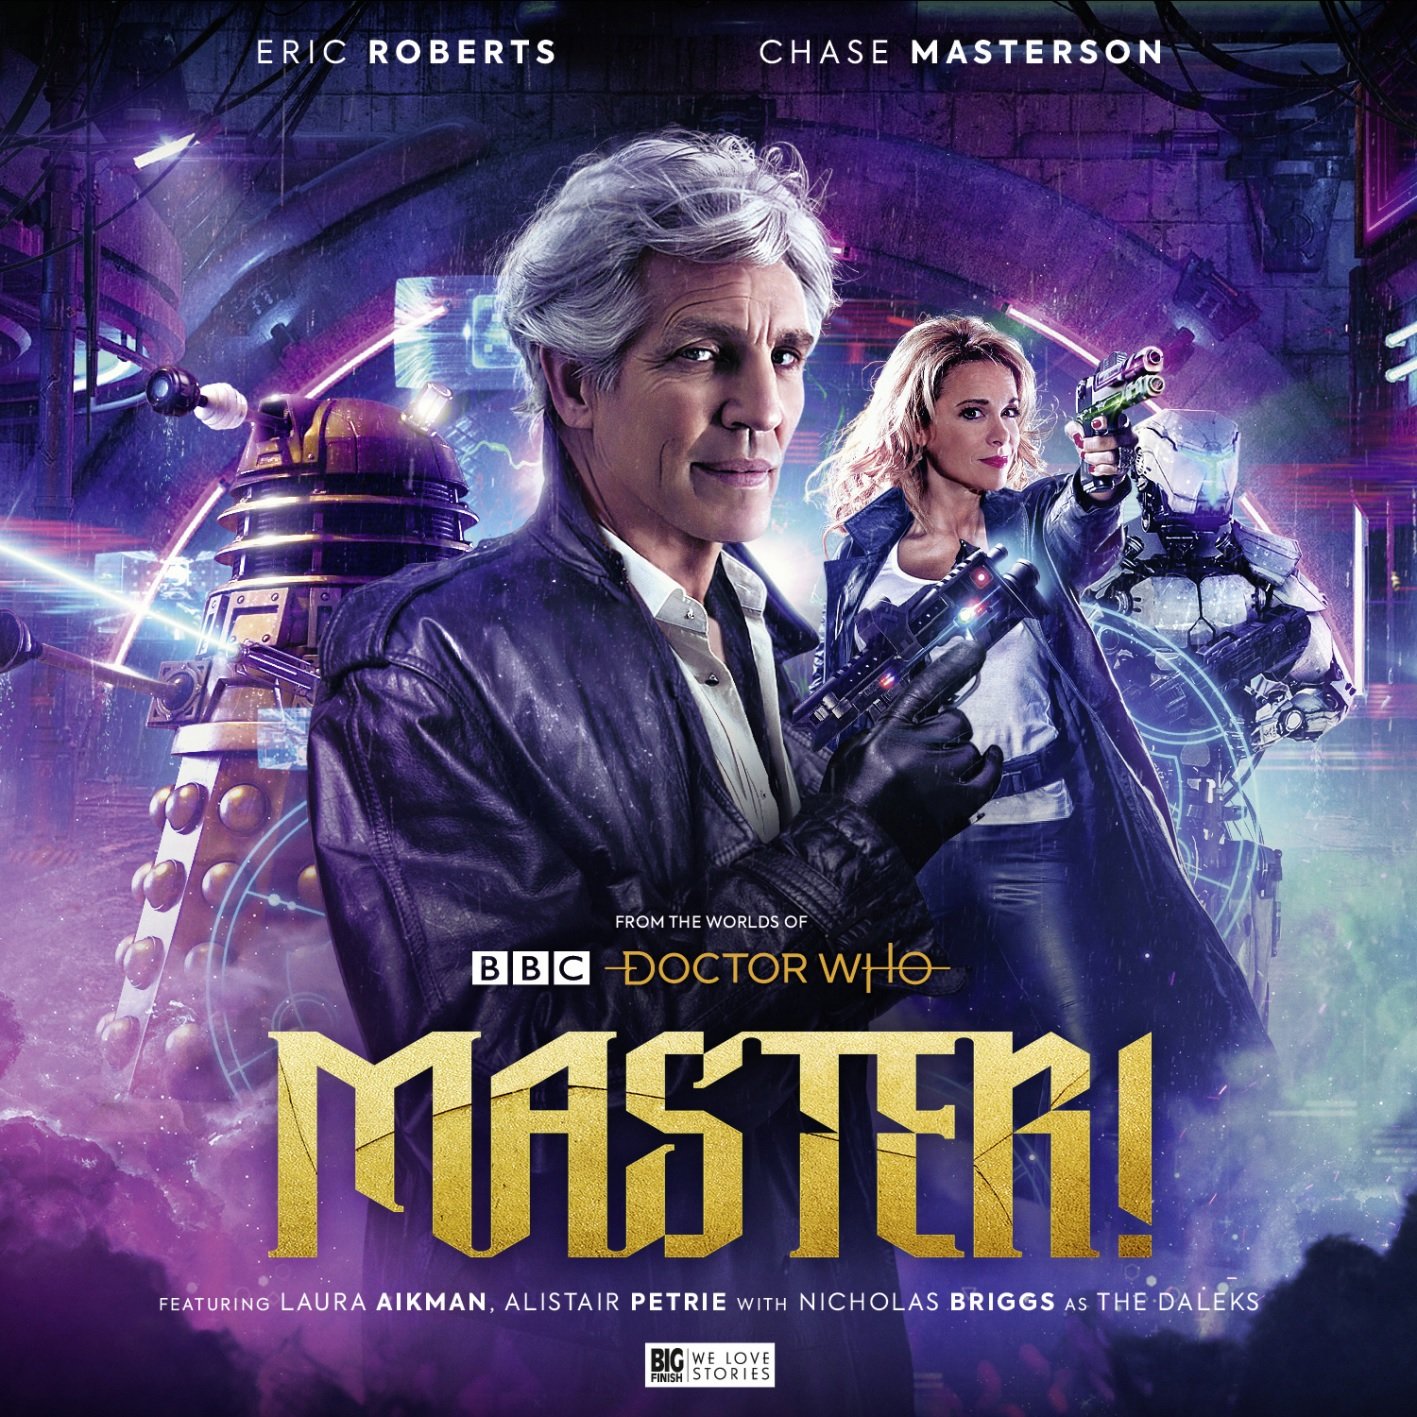 Eric Roberts Returns to Doctor Who in Big Finish’s Upcoming Box Set, MASTER!